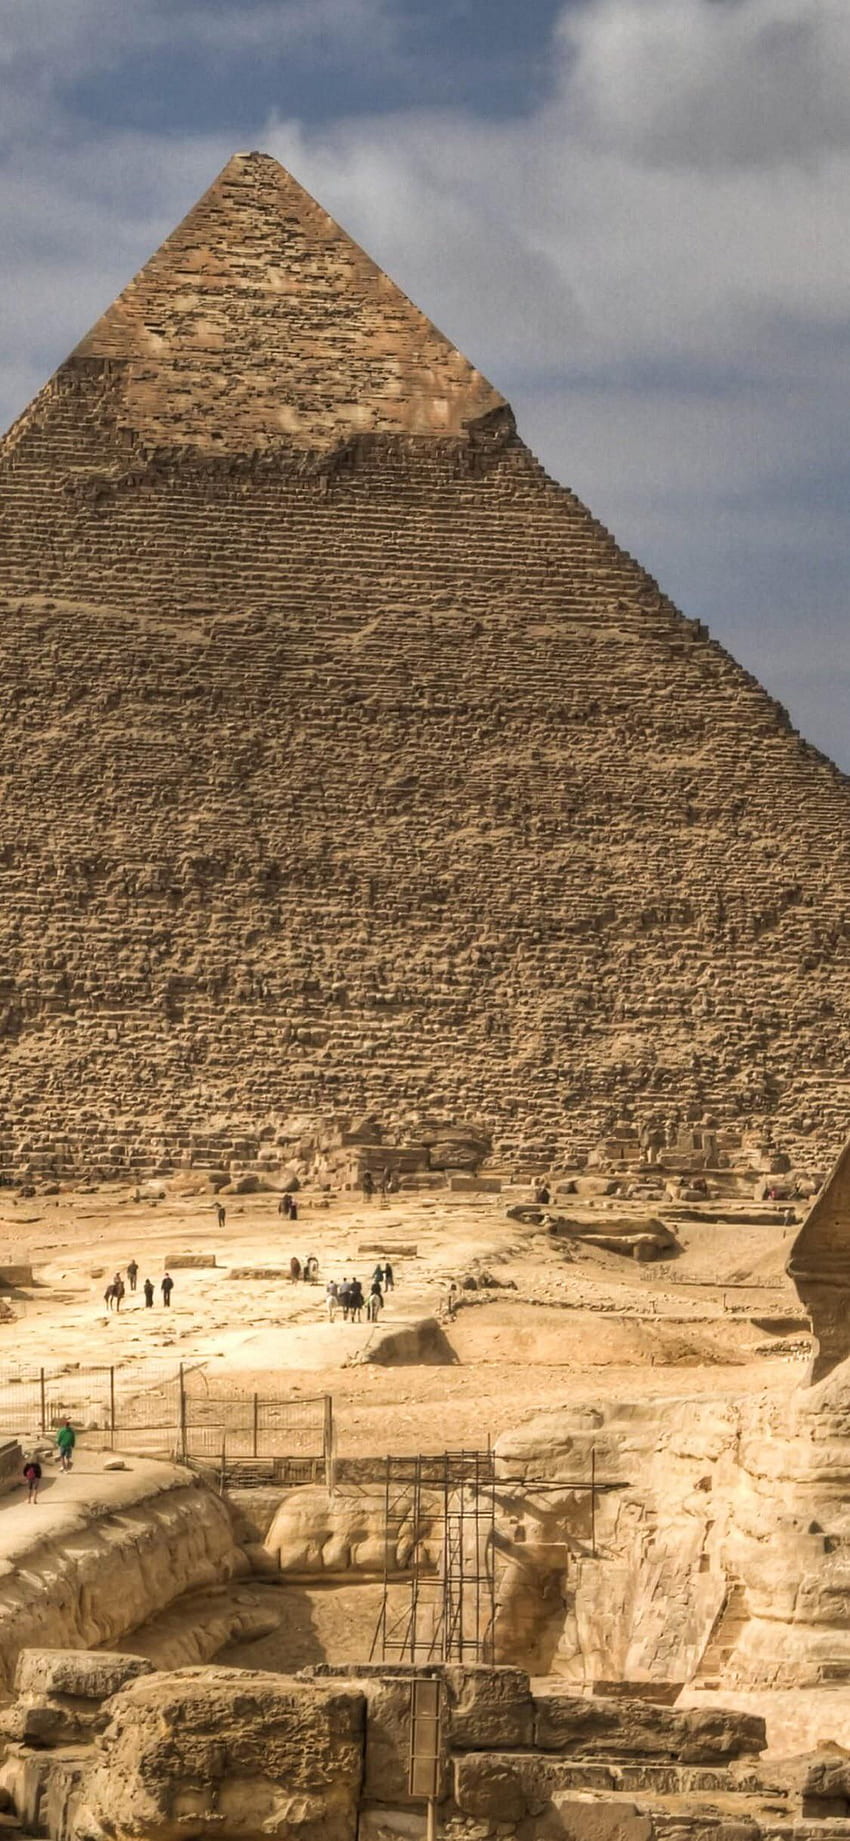 Taken from my country Egypt HD phone wallpaper